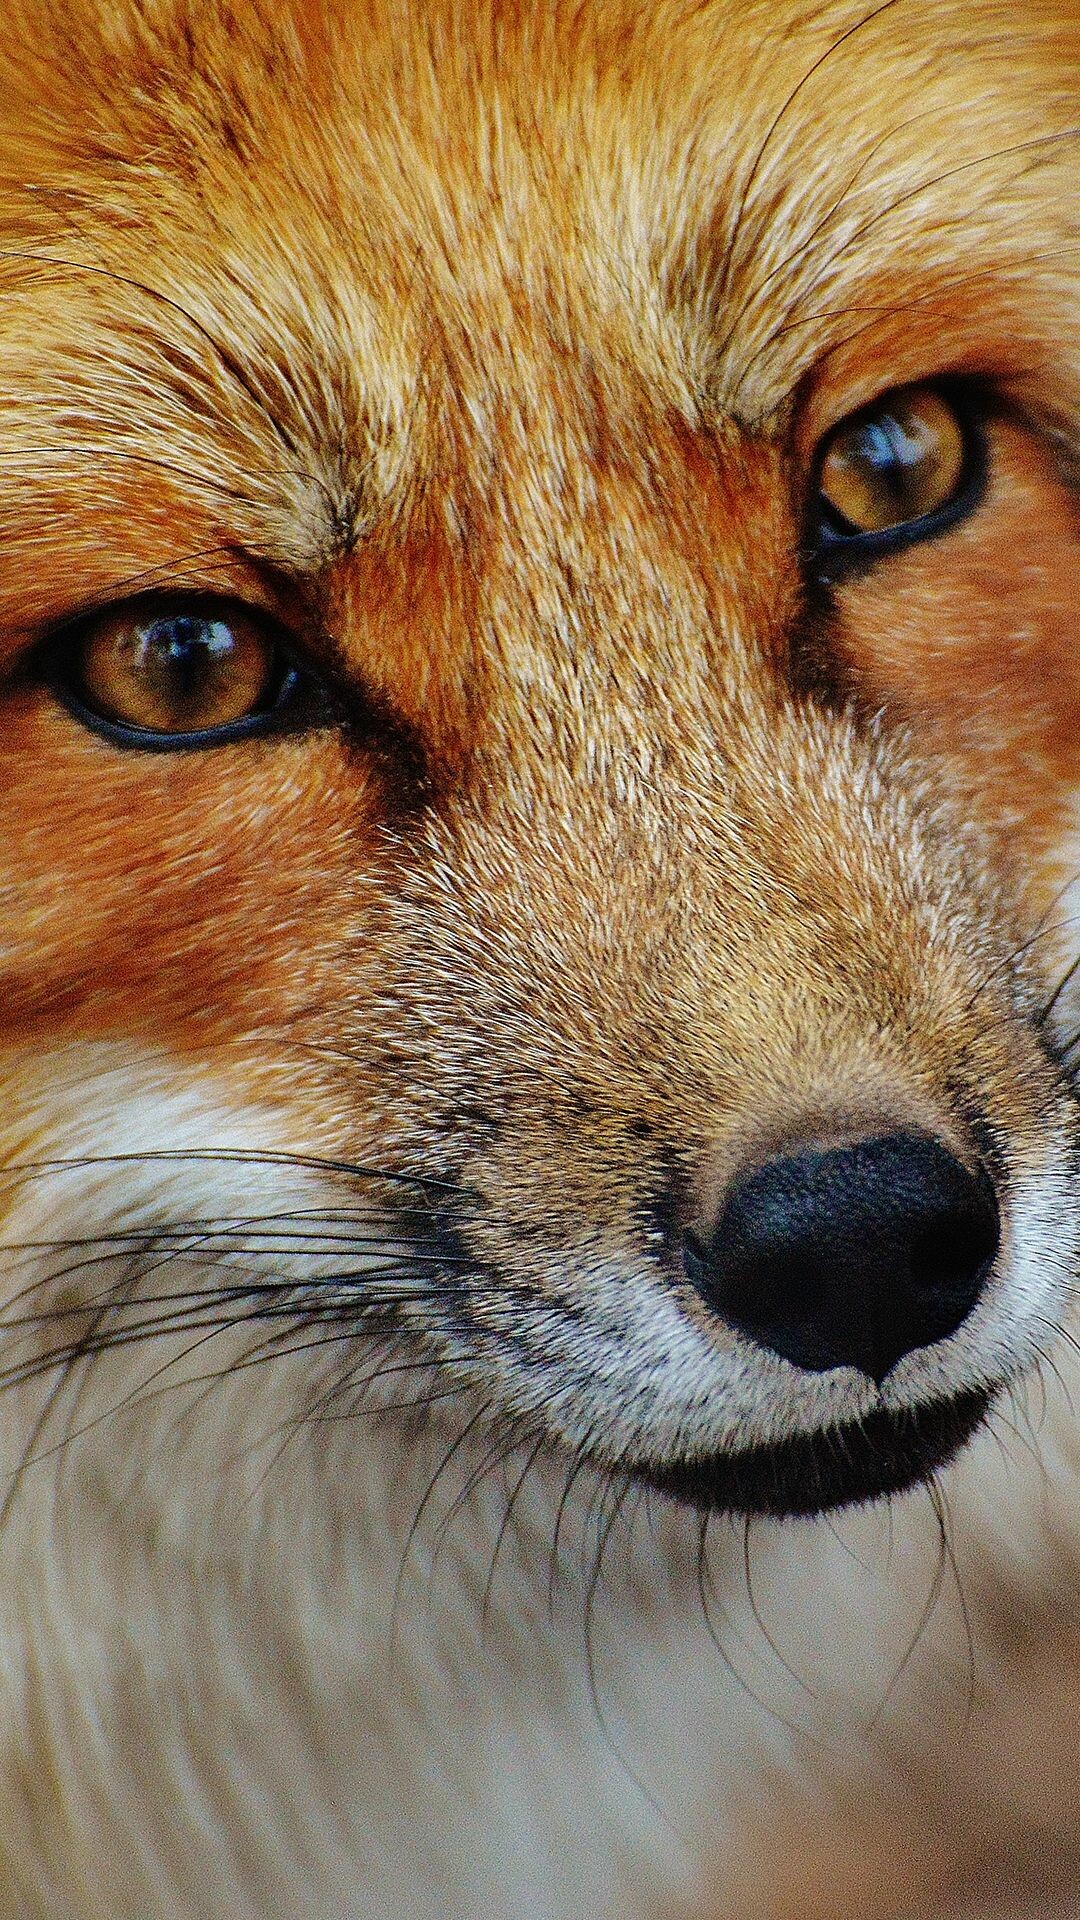 Fox: Opportunistic omnivores that eat a variety of meat, insects and plant materials, Muzzle. 1080x1920 Full HD Wallpaper.